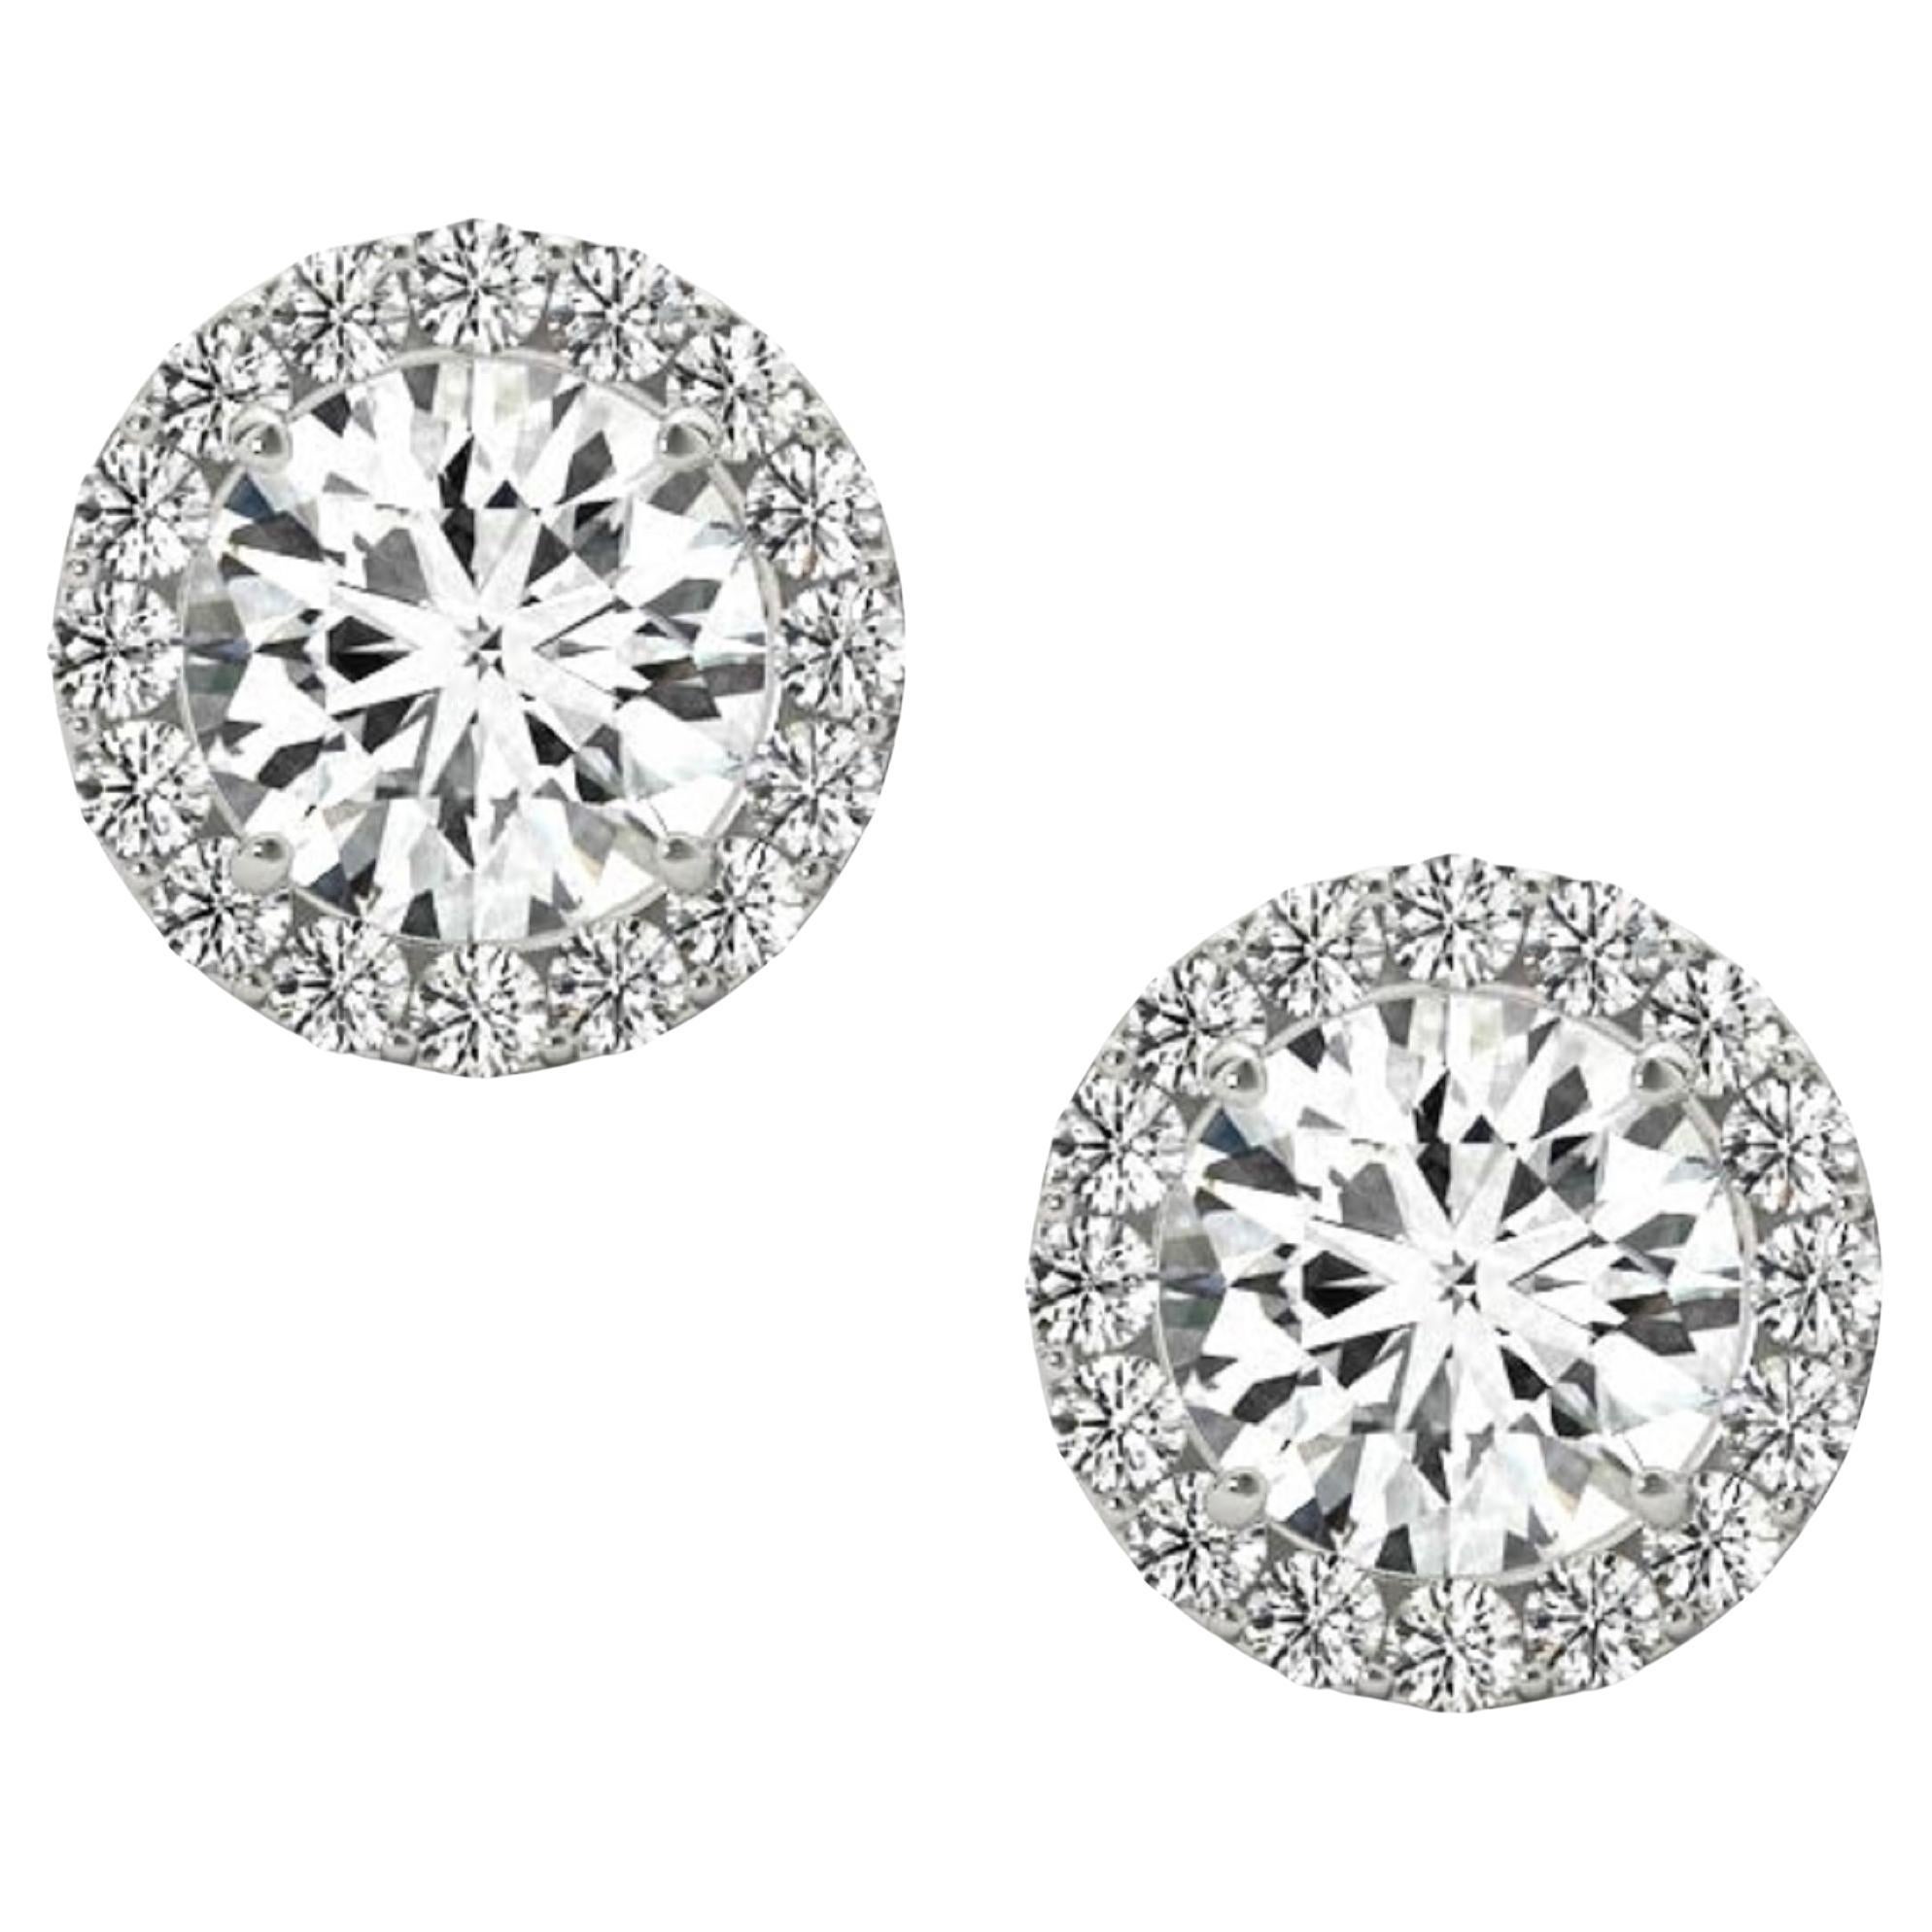 This stunning and impressively large 5.22 carat matched pair of round brilliant cut natural diamonds are very well cut, sparkle beautifully, and are offered at a remarkable value! They are 100% natural earth mined diamonds and have not received any